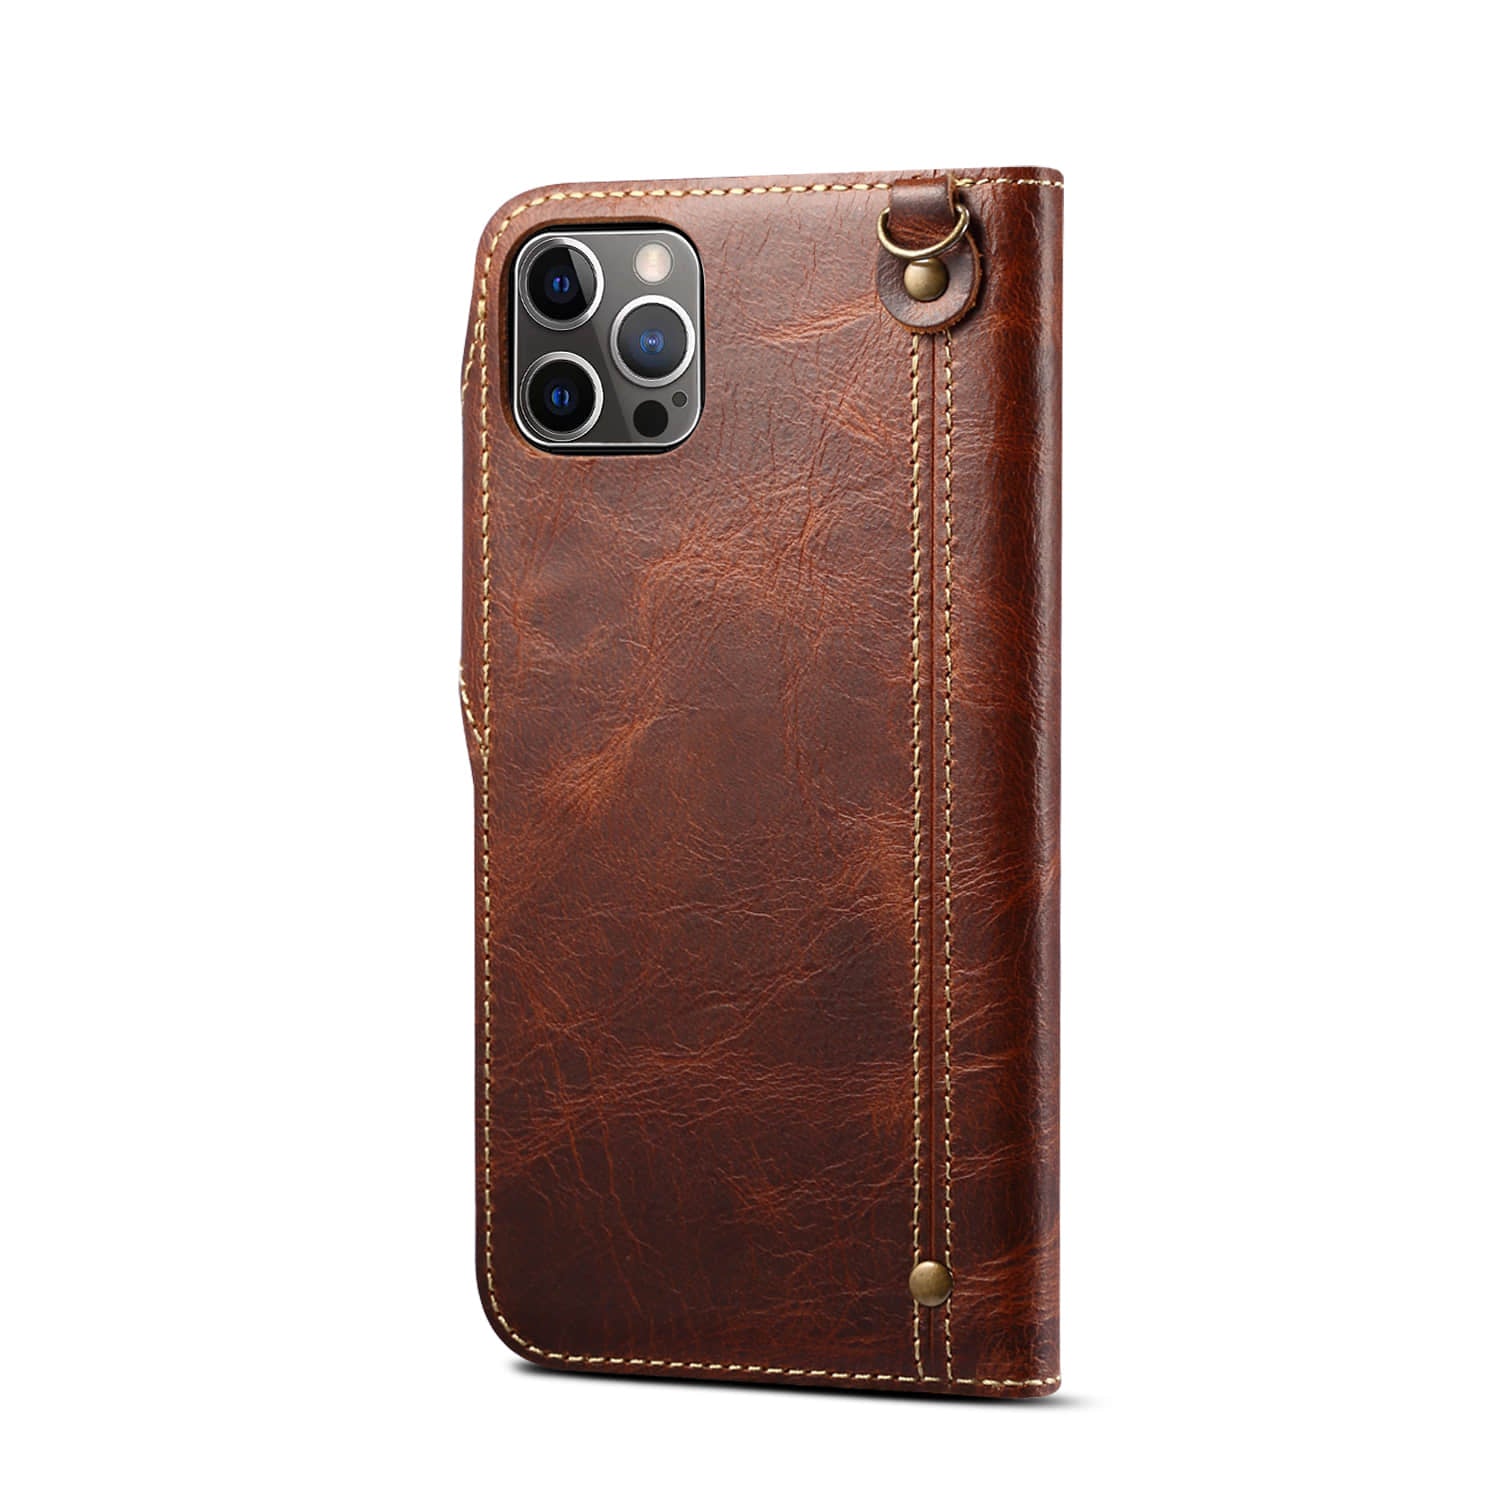 Caeouts Genuine Cowhide Leather Button Flip Phone Case Brown